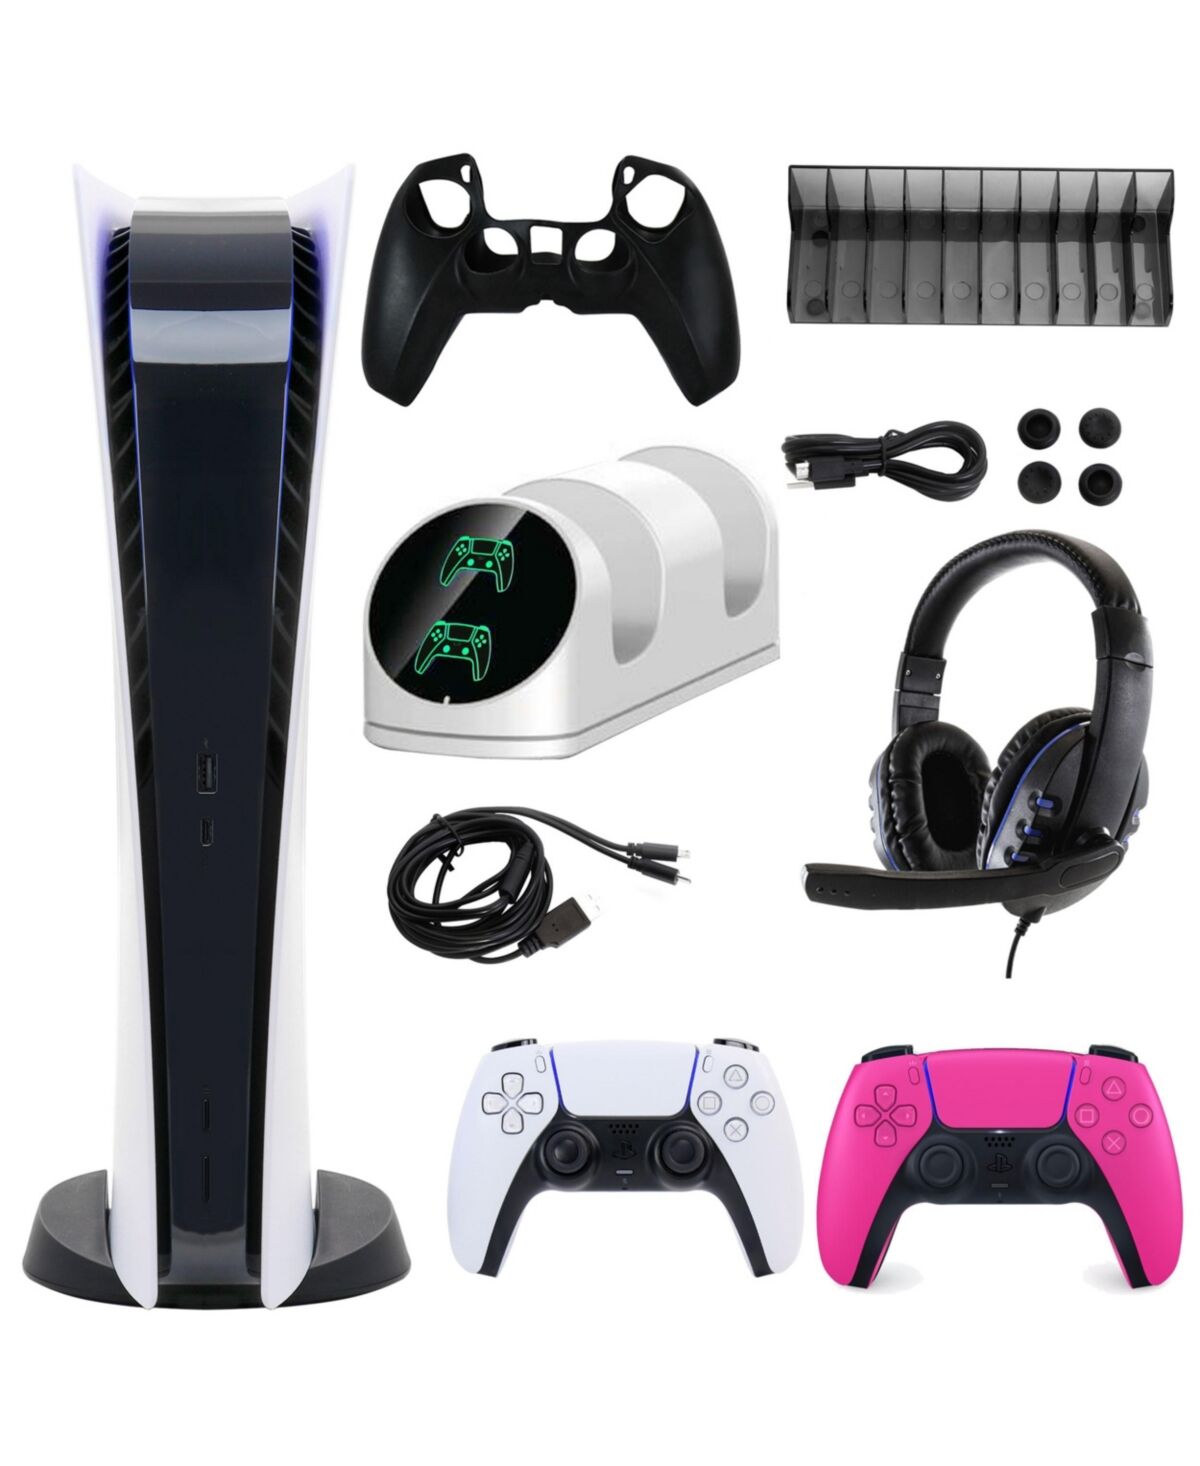 Playstation PS5 Digital Console with Extra Pink Dualsense Controller and Accessories Kit - Open White